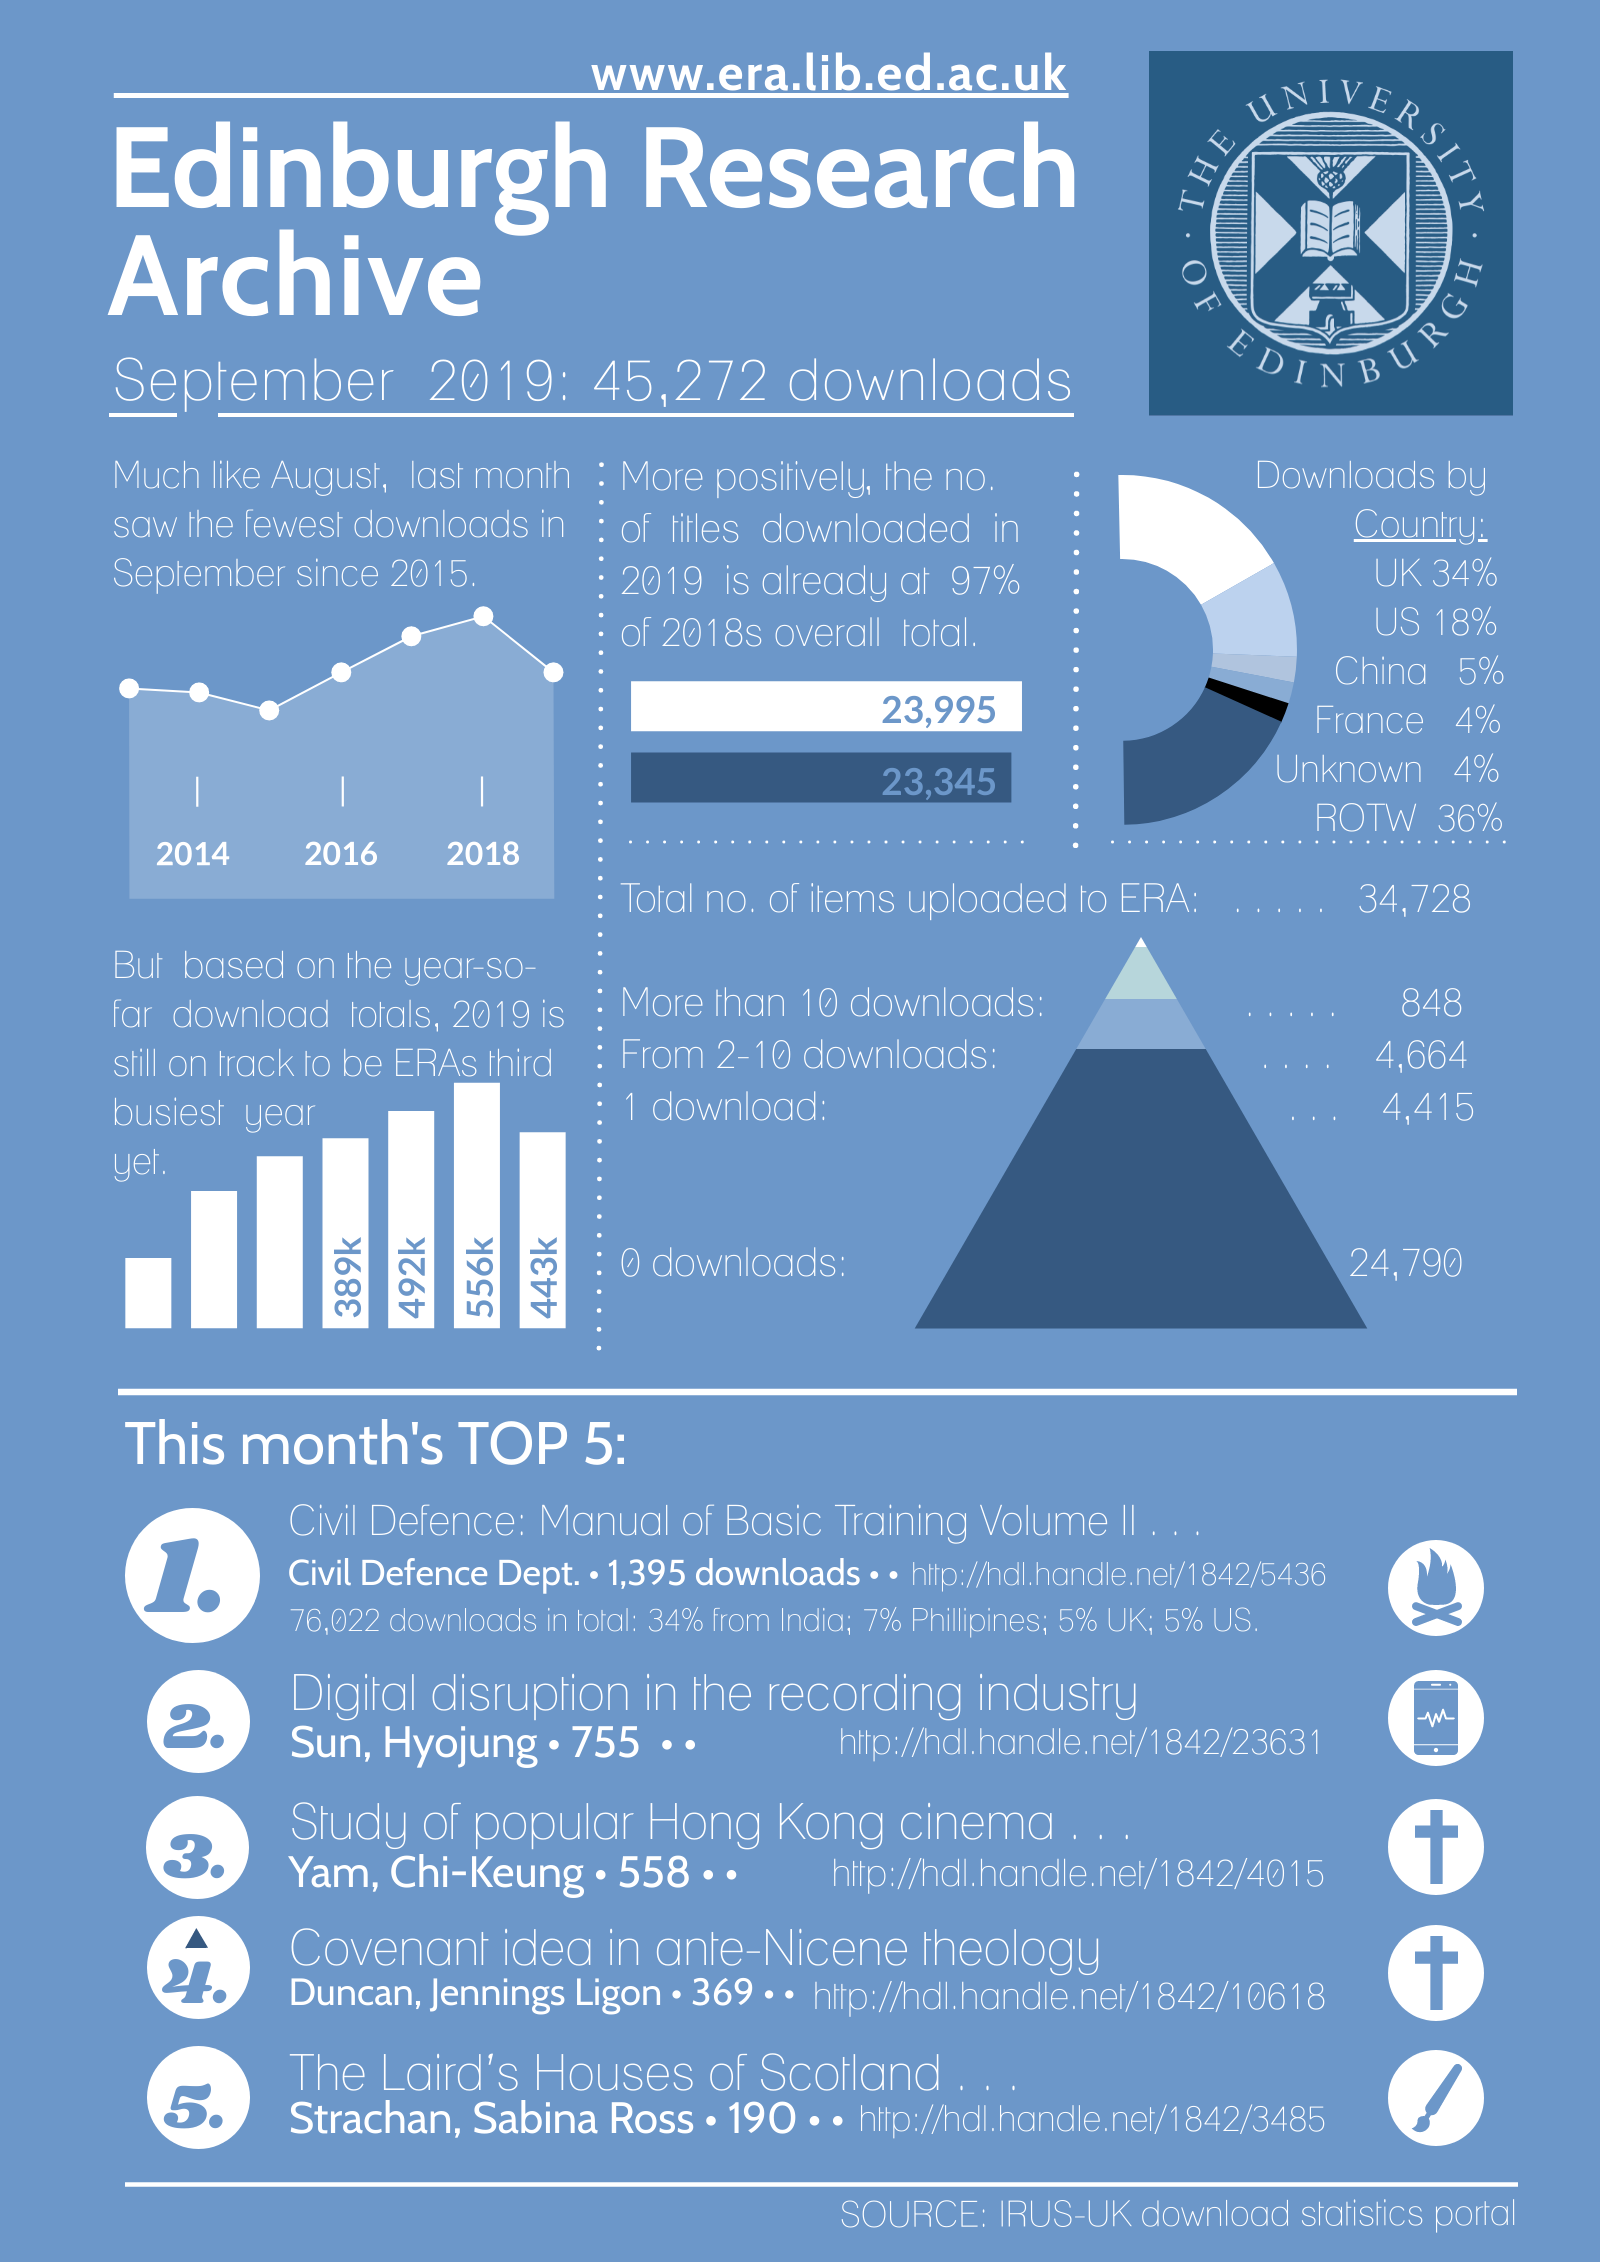 Edinburgh Research Archive: September 2019 downloads infographic